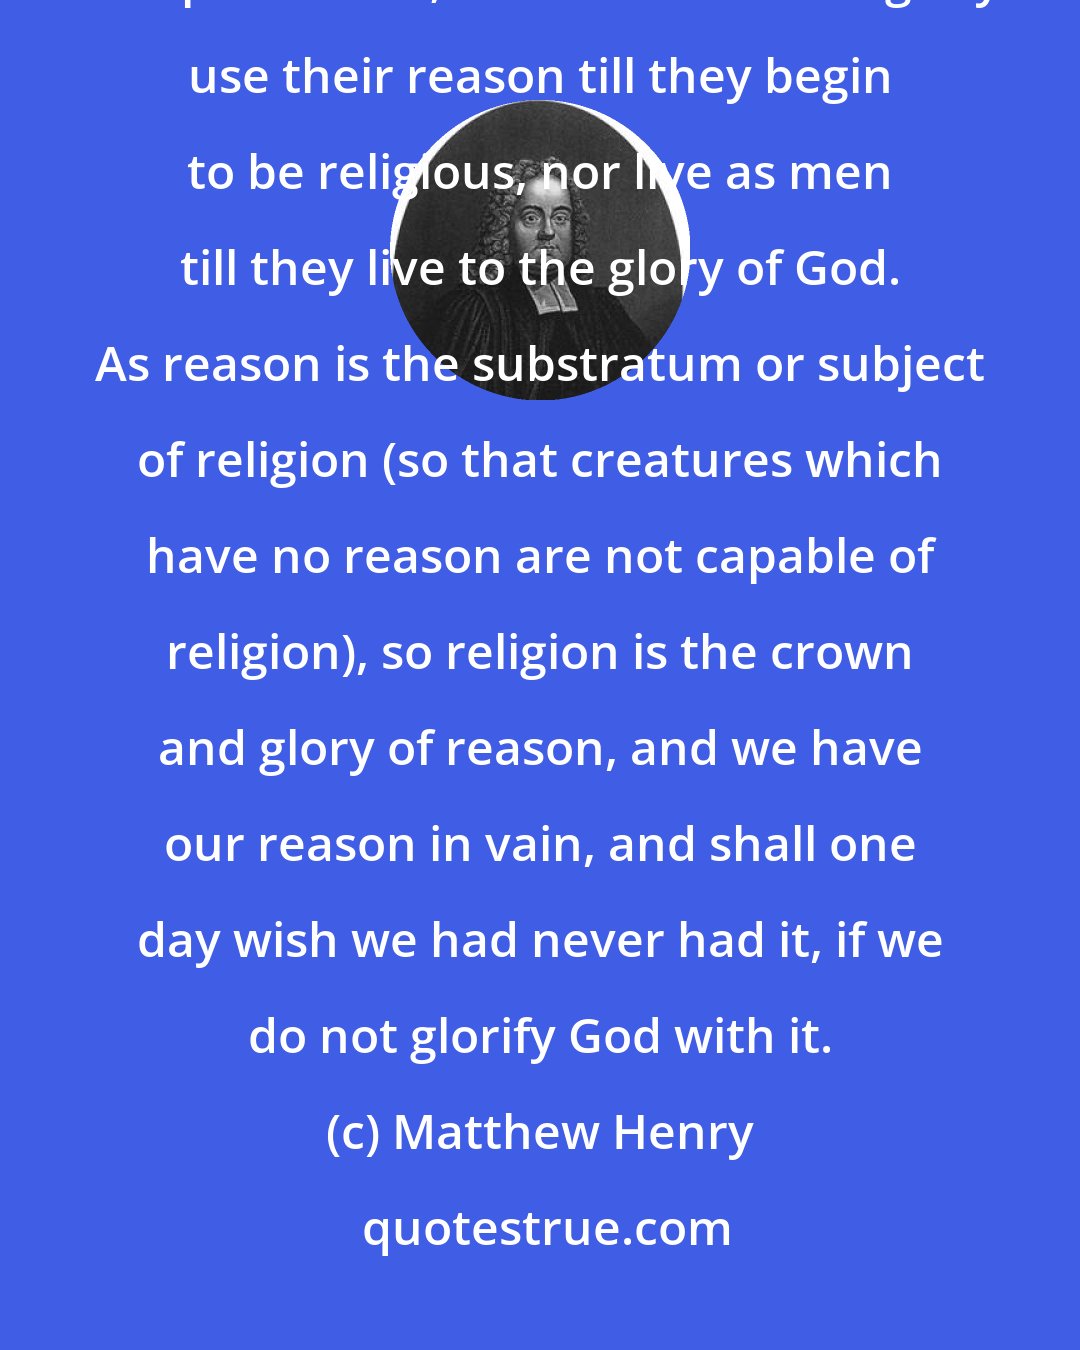 Matthew Henry: Those may justly be reckoned void of understanding that do not bless and praise God; nor do men ever rightly use their reason till they begin to be religious, nor live as men till they live to the glory of God. As reason is the substratum or subject of religion (so that creatures which have no reason are not capable of religion), so religion is the crown and glory of reason, and we have our reason in vain, and shall one day wish we had never had it, if we do not glorify God with it.